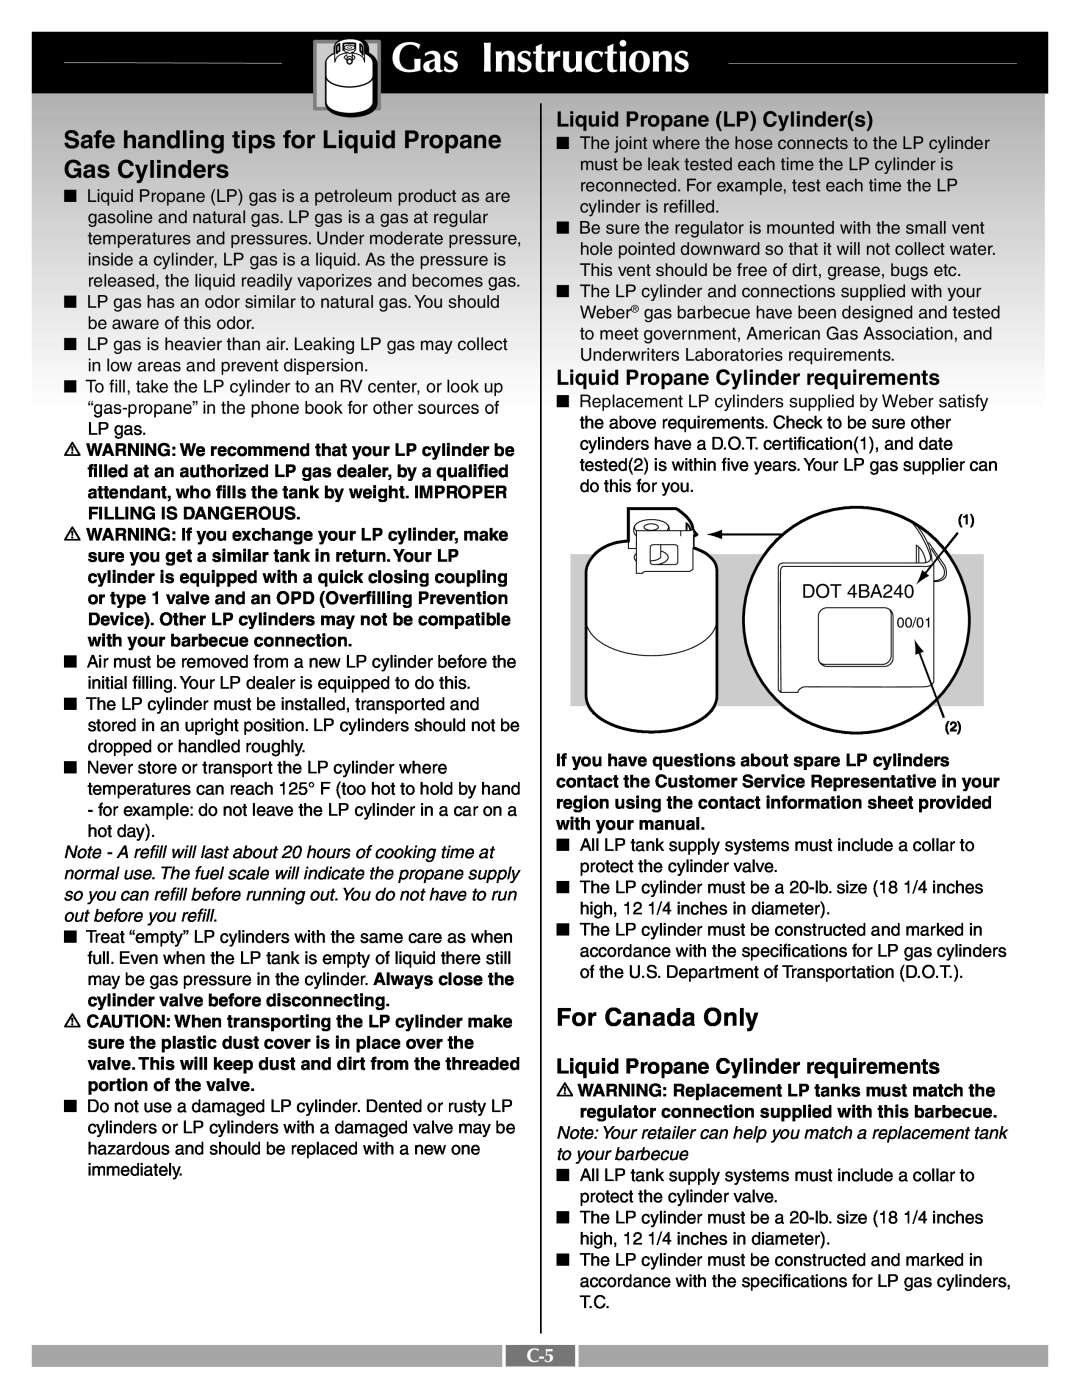 Weber 55249 Safe handling tips for Liquid Propane, Gas Cylinders, For Canada Only, Liquid Propane LP Cylinders, DOT 4BA240 